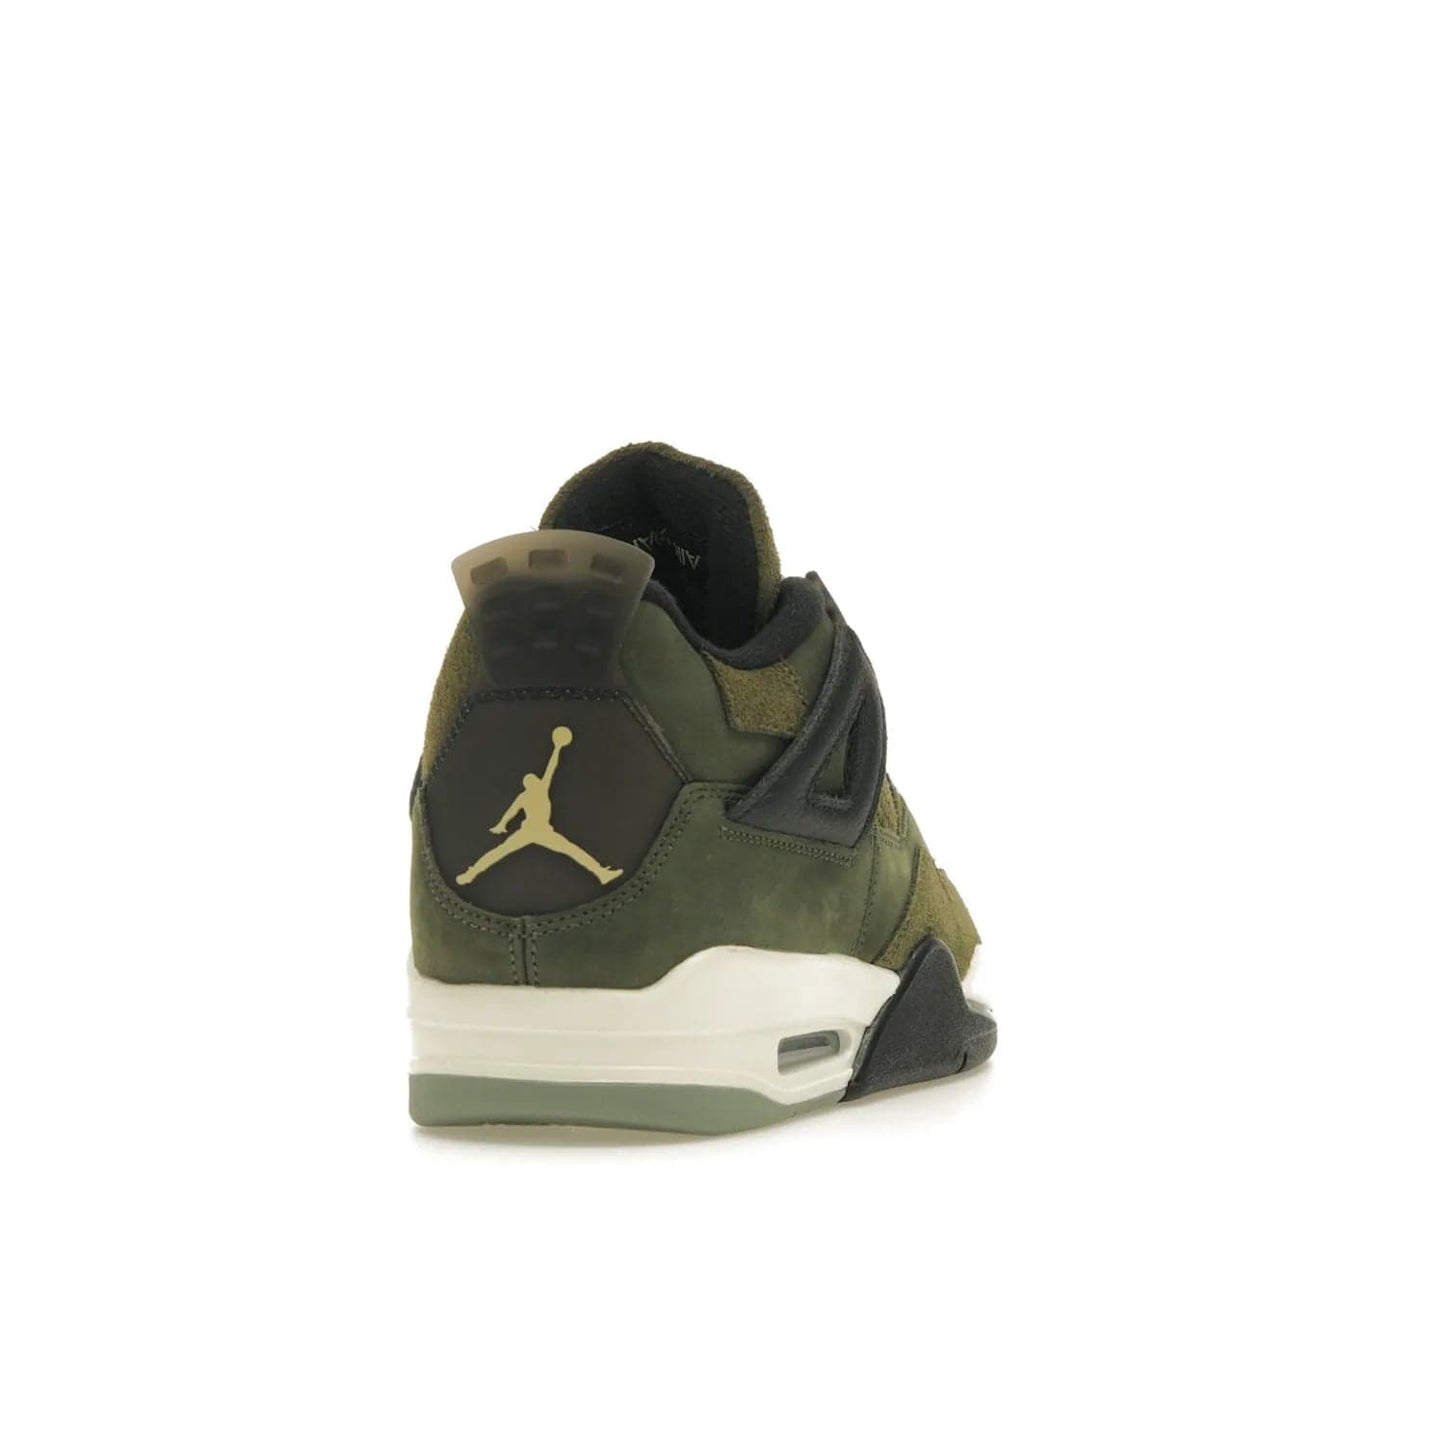 Jordan 4 Retro SE Craft Medium Olive - Image 30 - Only at www.BallersClubKickz.com - Grab the Jordan 4 Retro SE Crafts for a unique style. Combines Medium Olive, Pale Vanilla, Khaki, Black and Sail, with same classic shape, cushioning, and rubber outsole. Available on November 18th!